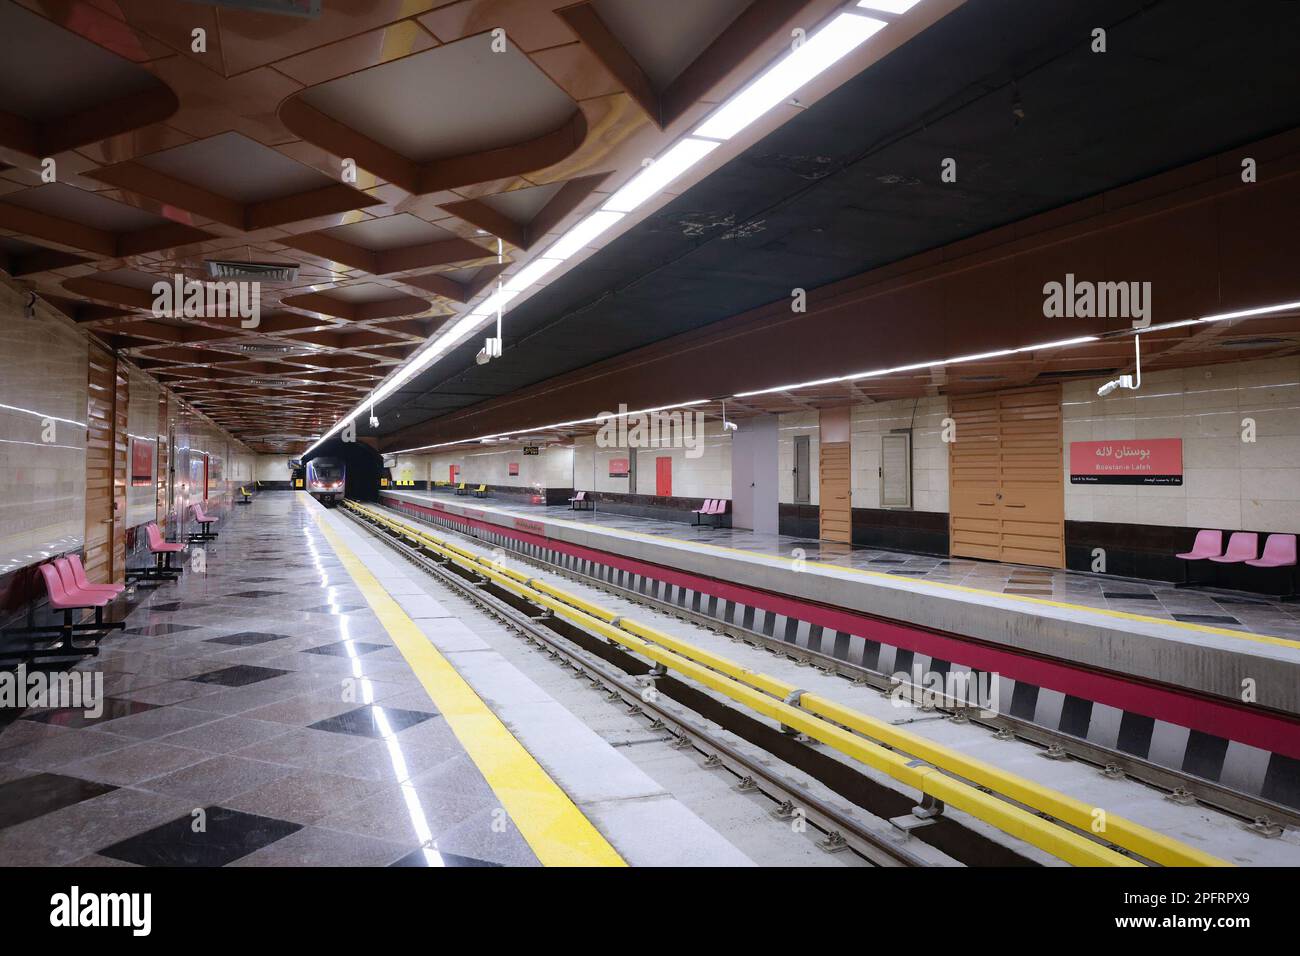 March 18, 2023, Tehran, Tehran, Iran: A view of the Tehran metro station during the opening ceremony of 5 new stations of the Tehran Metro in the presence of Iranian President Ebrahim Raisi. The Tehran Metro is a rapid transit system serving Tehran, the capital of Iran. It is the most extensive metro system in the Middle East. The system is owned and operated by Tehran Urban and Suburban Railway. It consists of six operational metro lines (and an additional commuter rail line), with construction underway on three lines, including the west extension of line 4, line 6 and the north and east exte Stock Photo